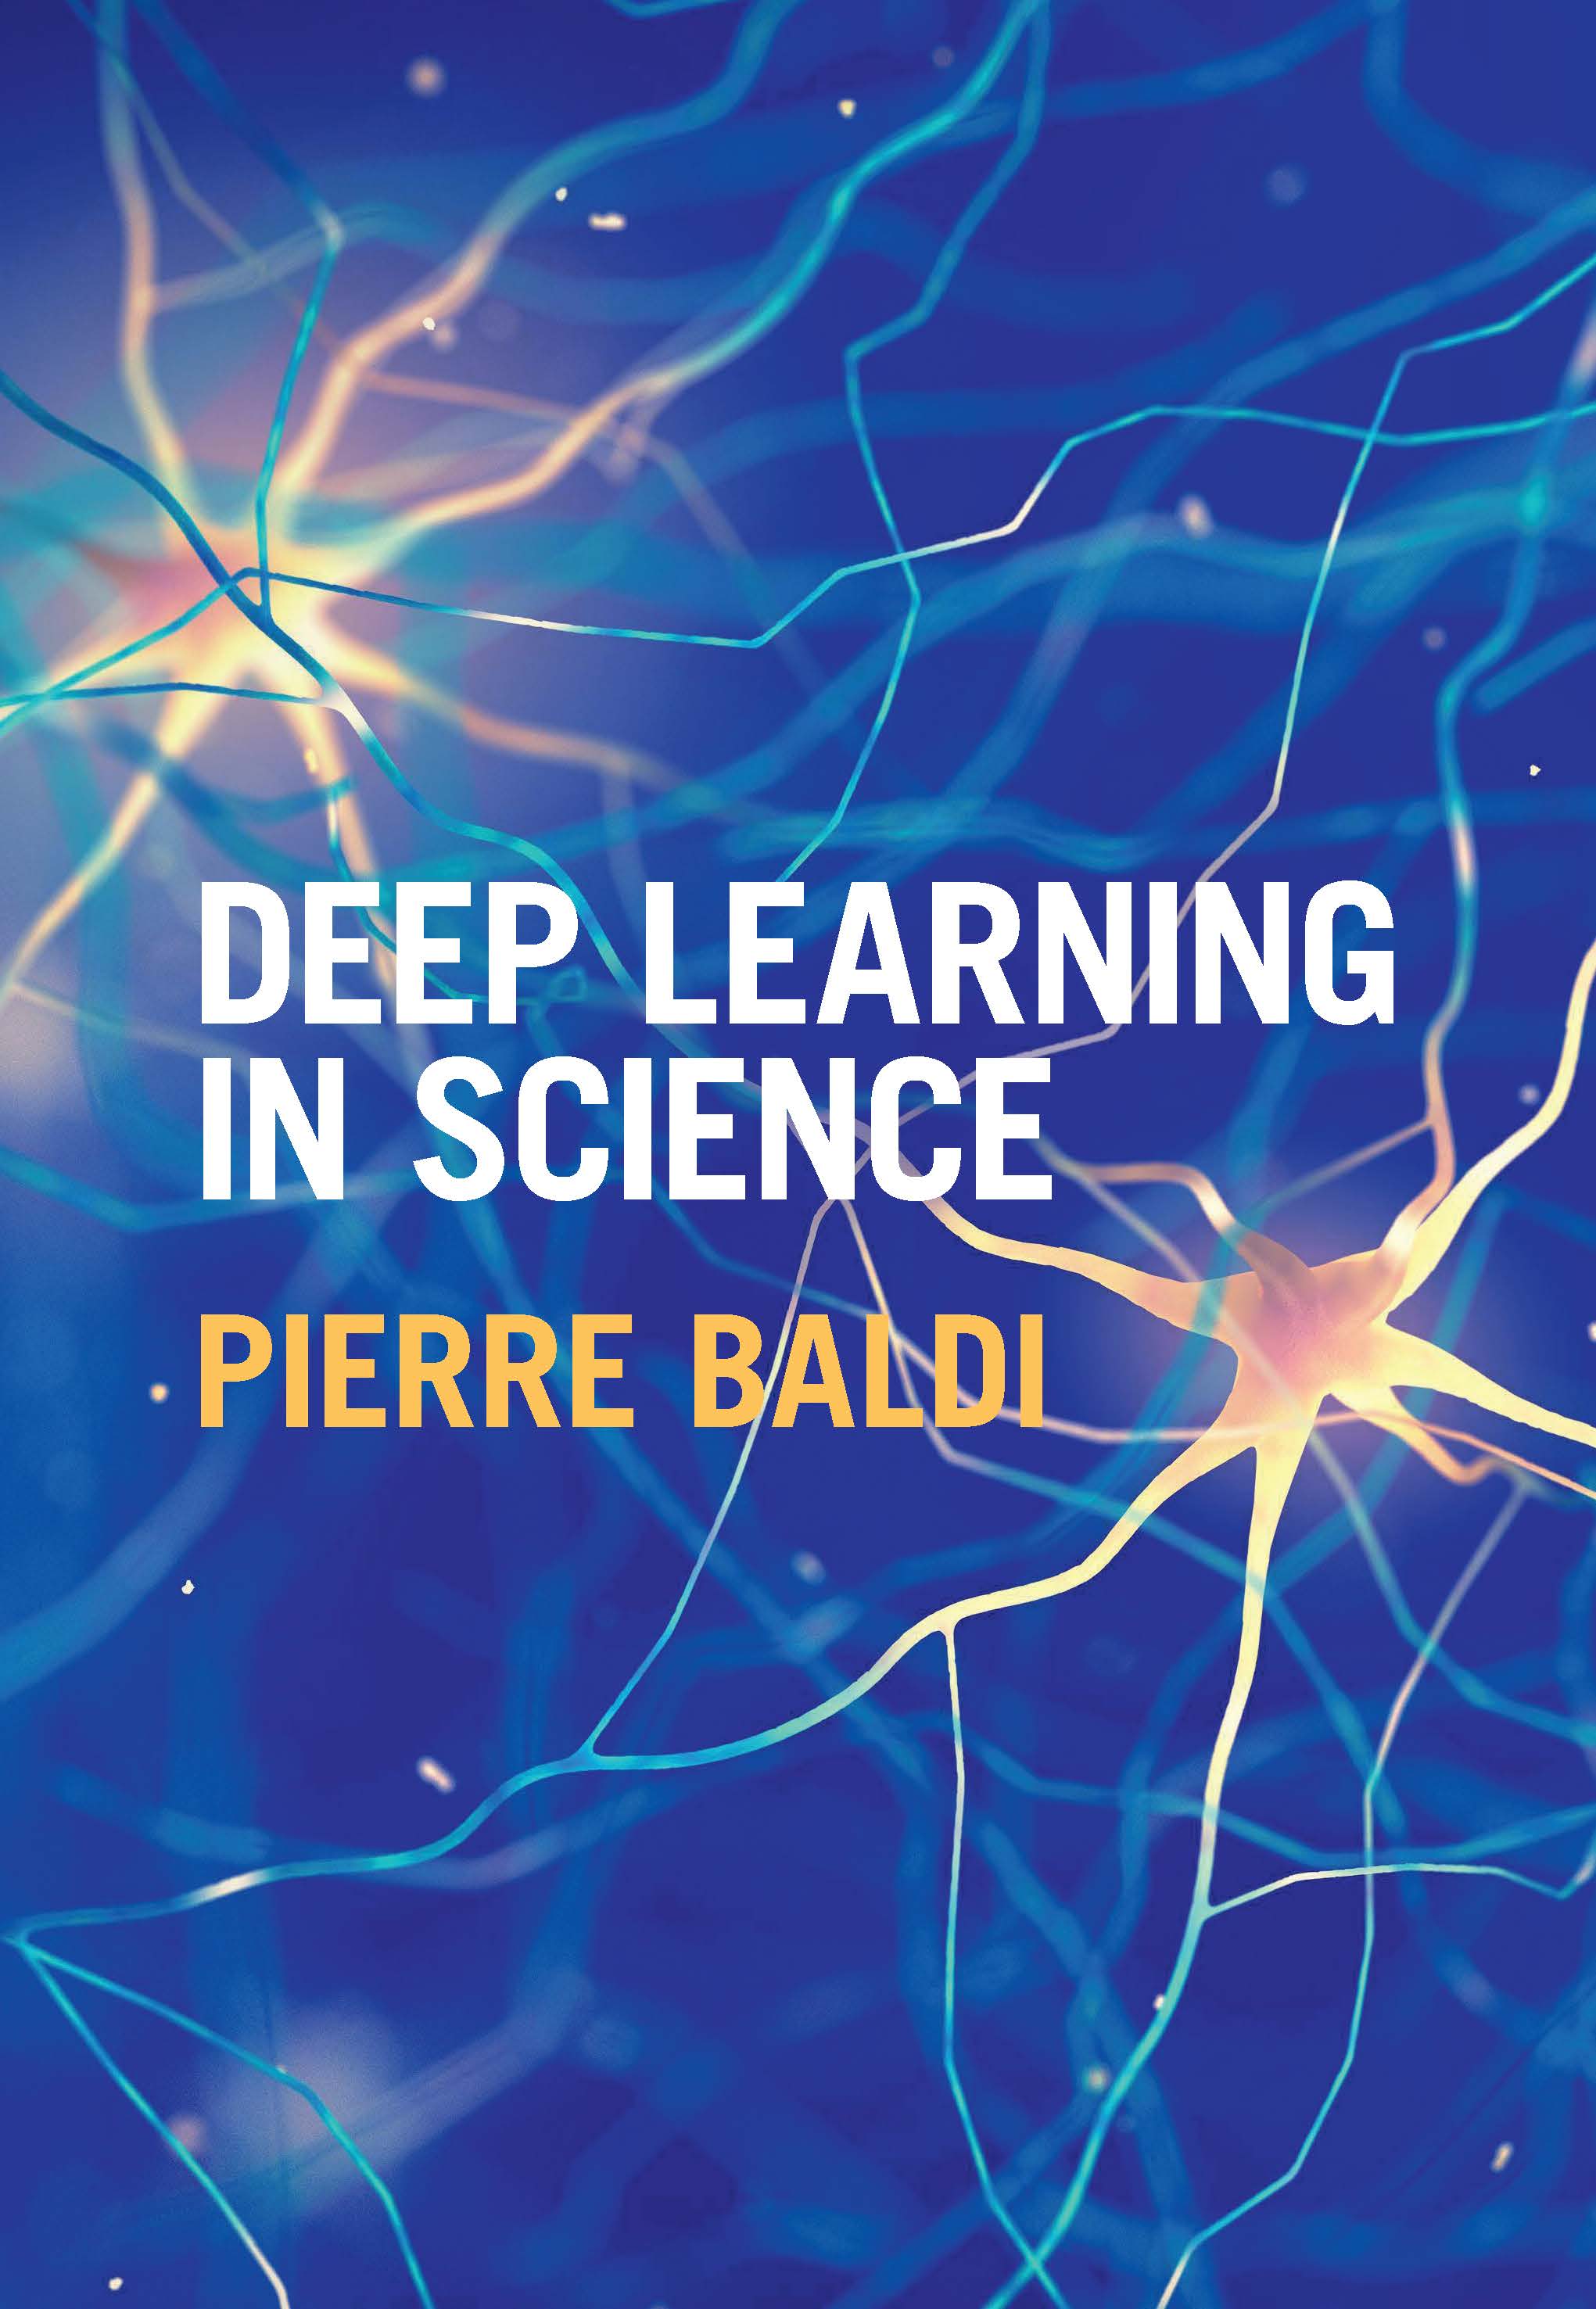 Deep
Learning in Science